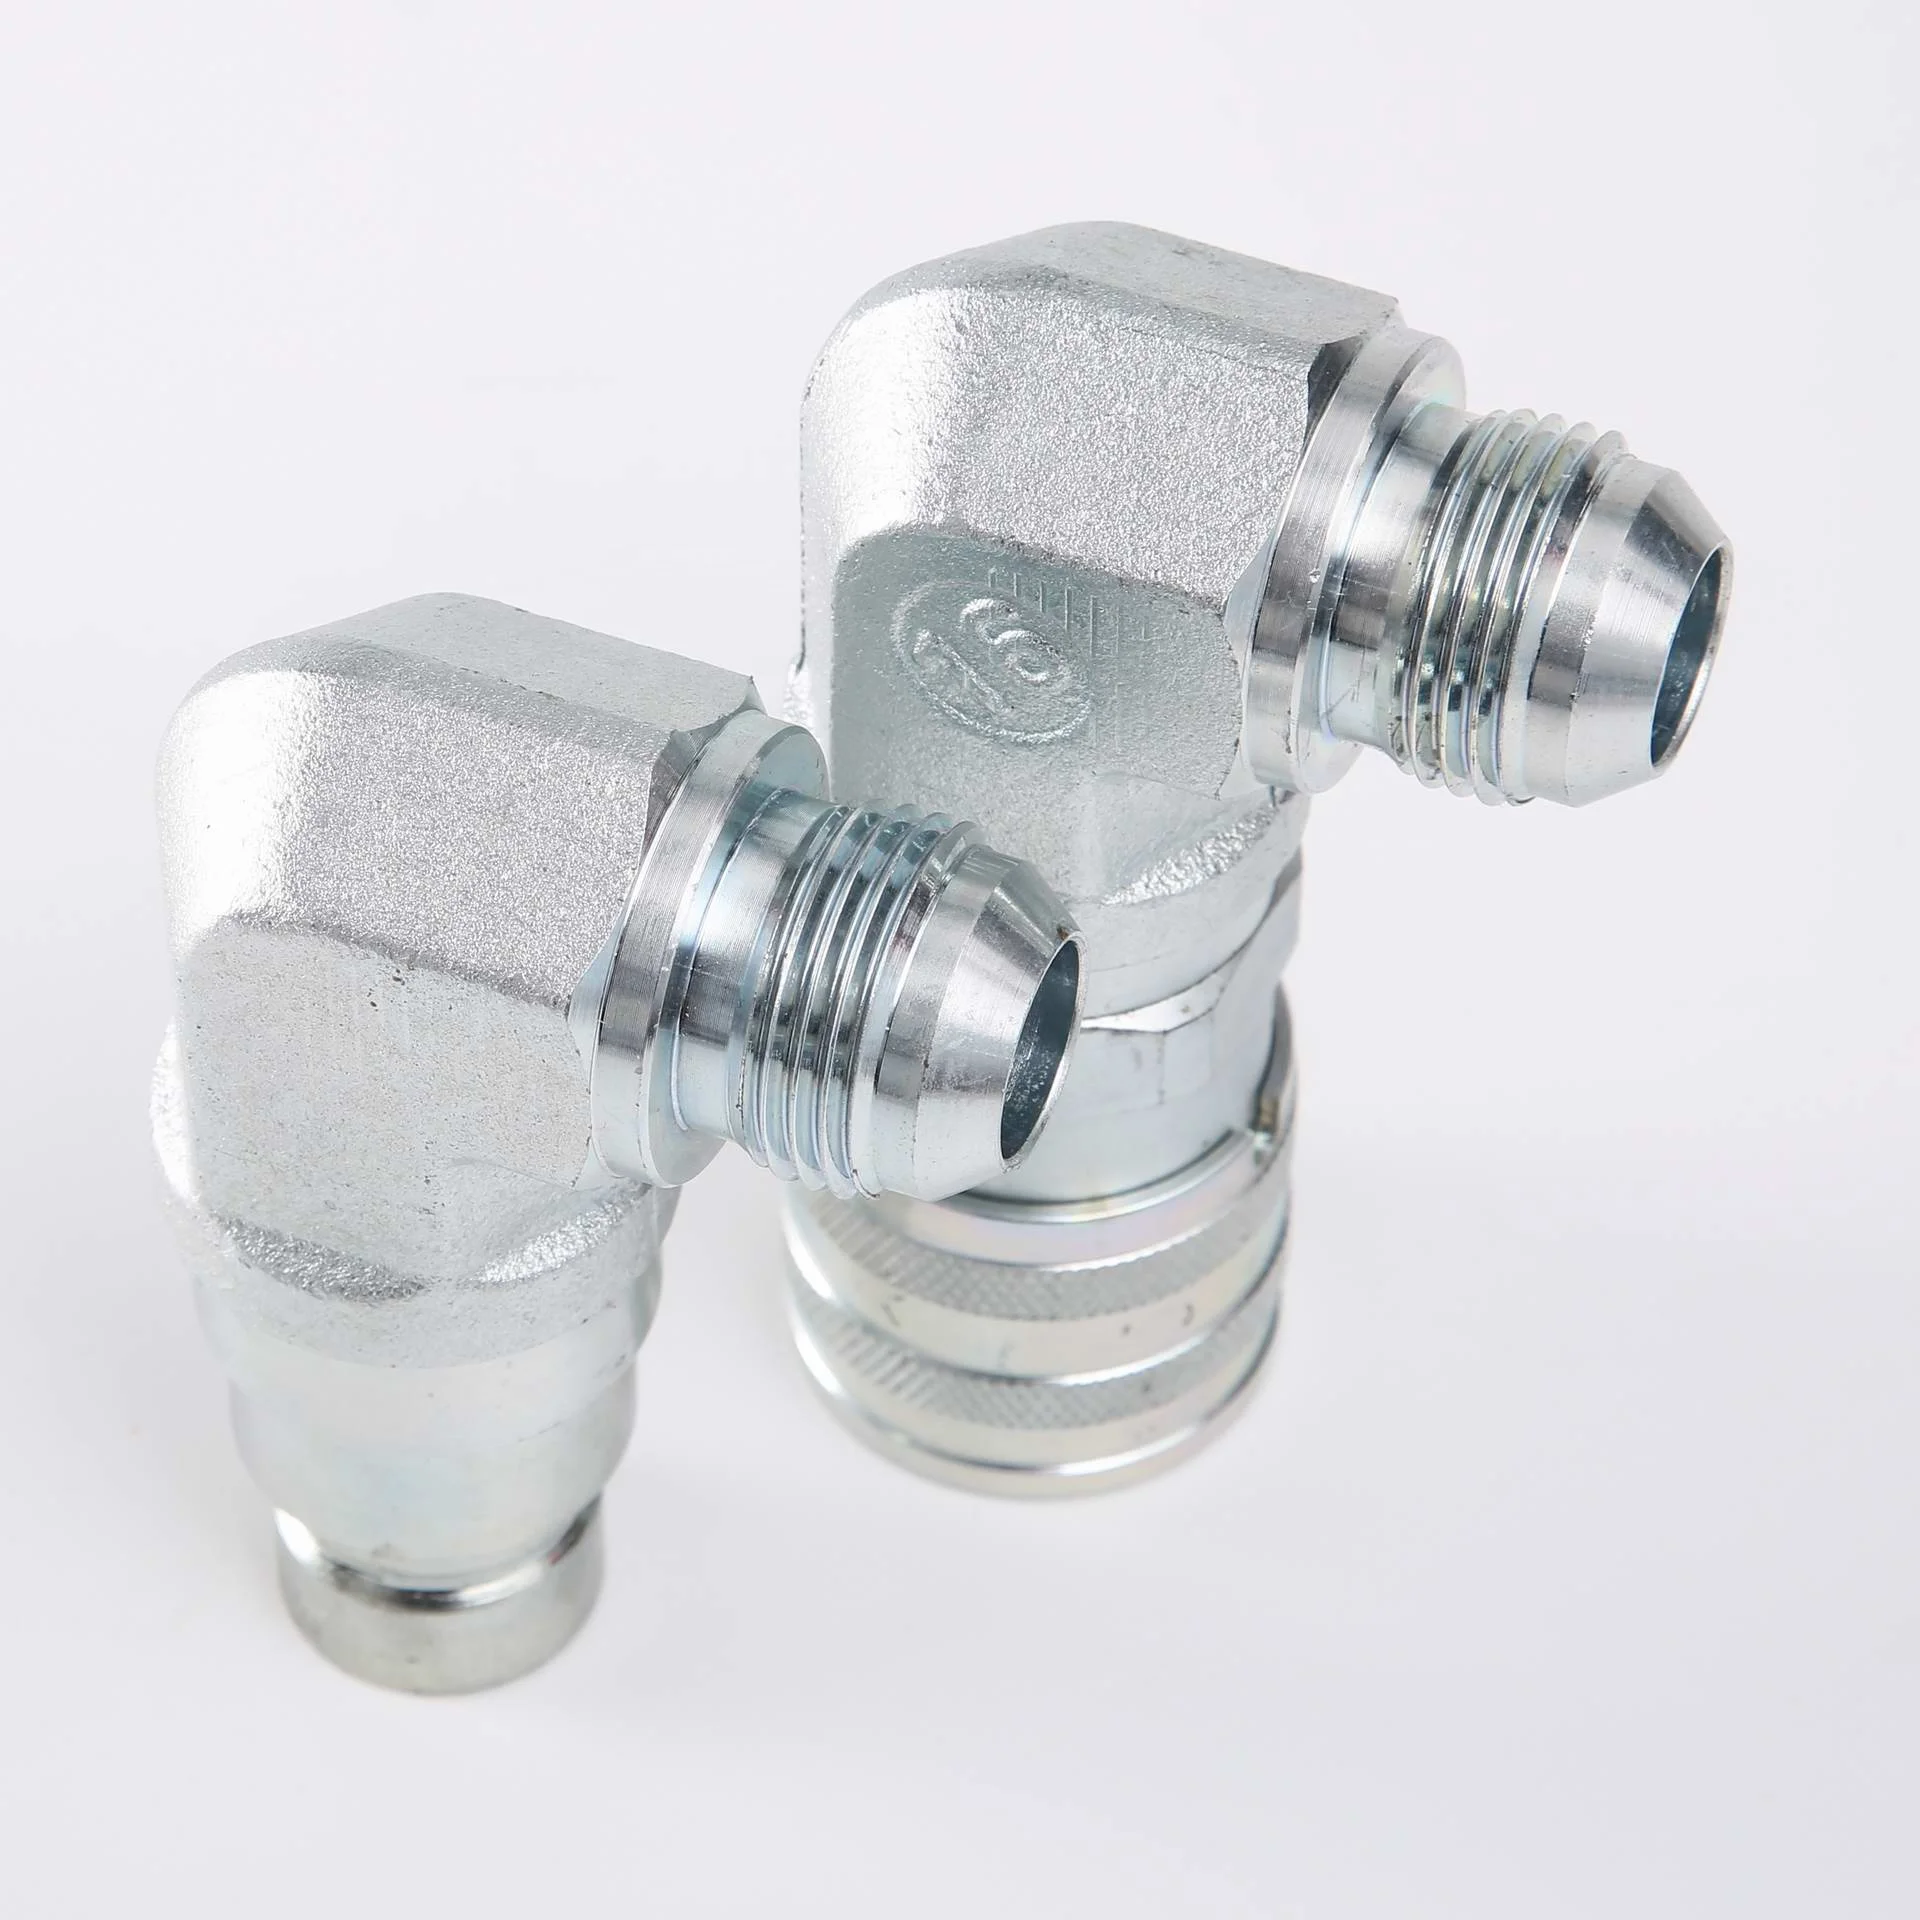 
Customized ISO16028 with 90 degree elbow flat face JIC male threaded hydraulic quick release coupling 1/2 inch 